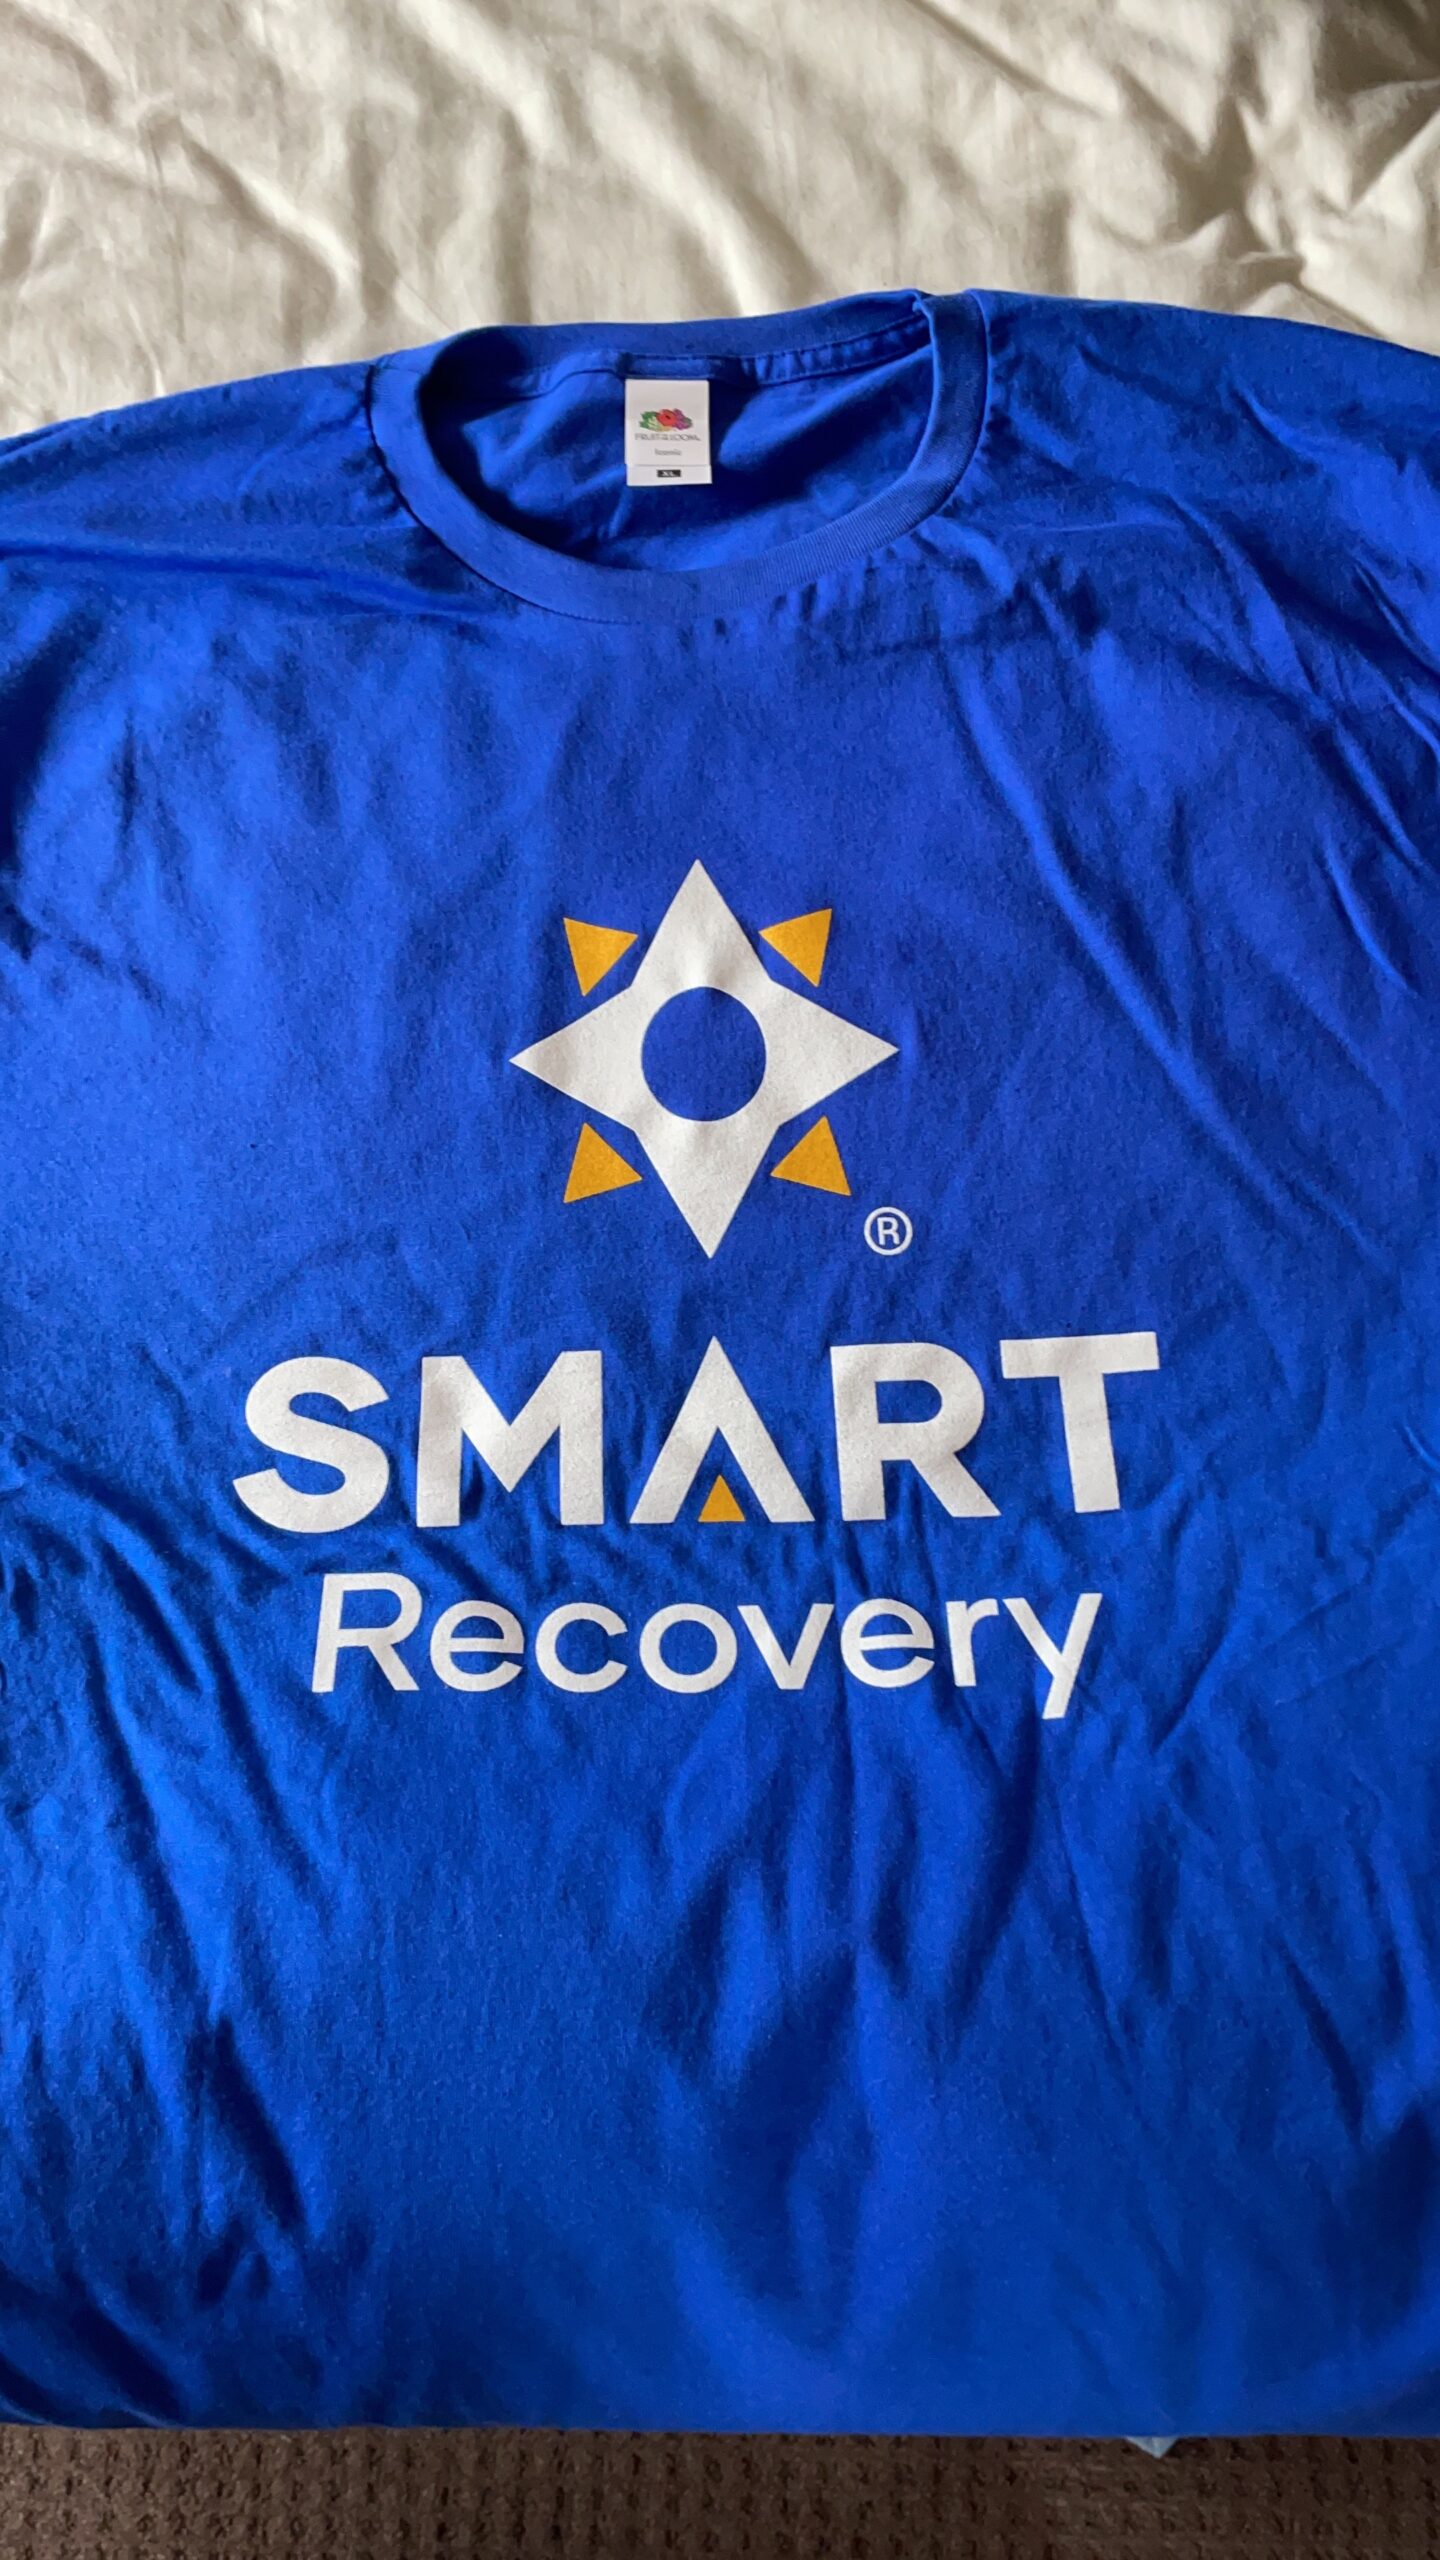 SMART Recovery T-Shirt